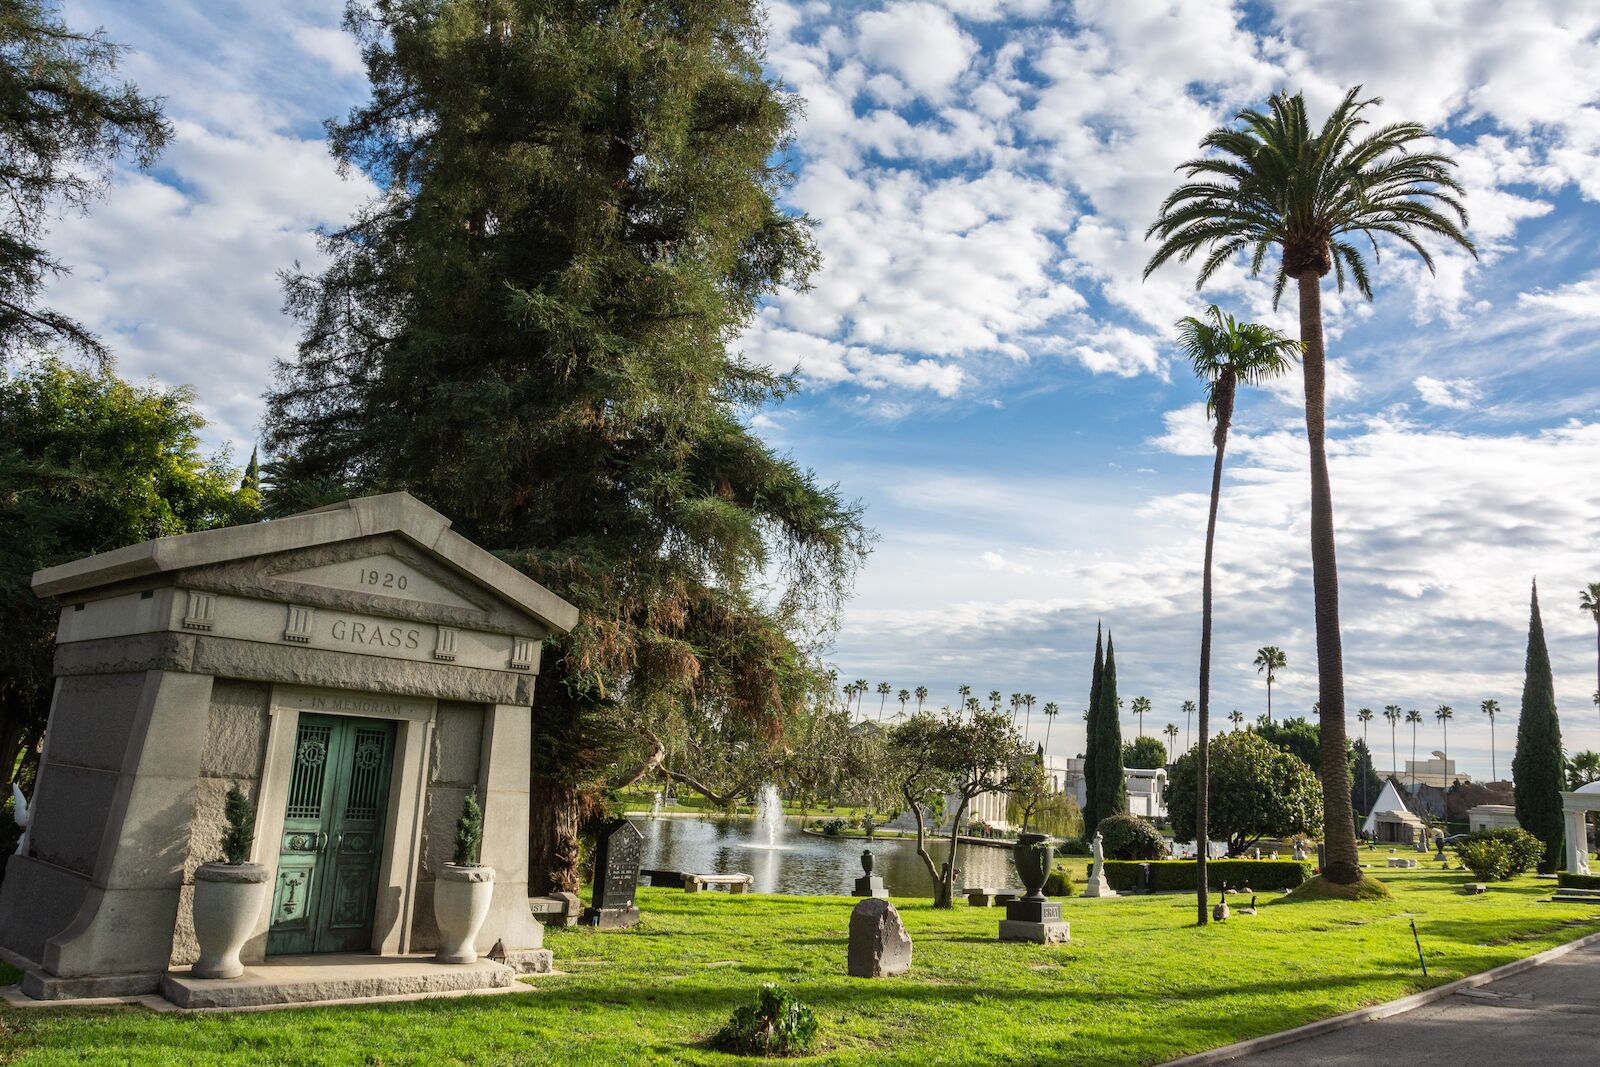 Going to see a movie at the Hollywood Forever Cemetery is one of the best things to do in Los Angeles